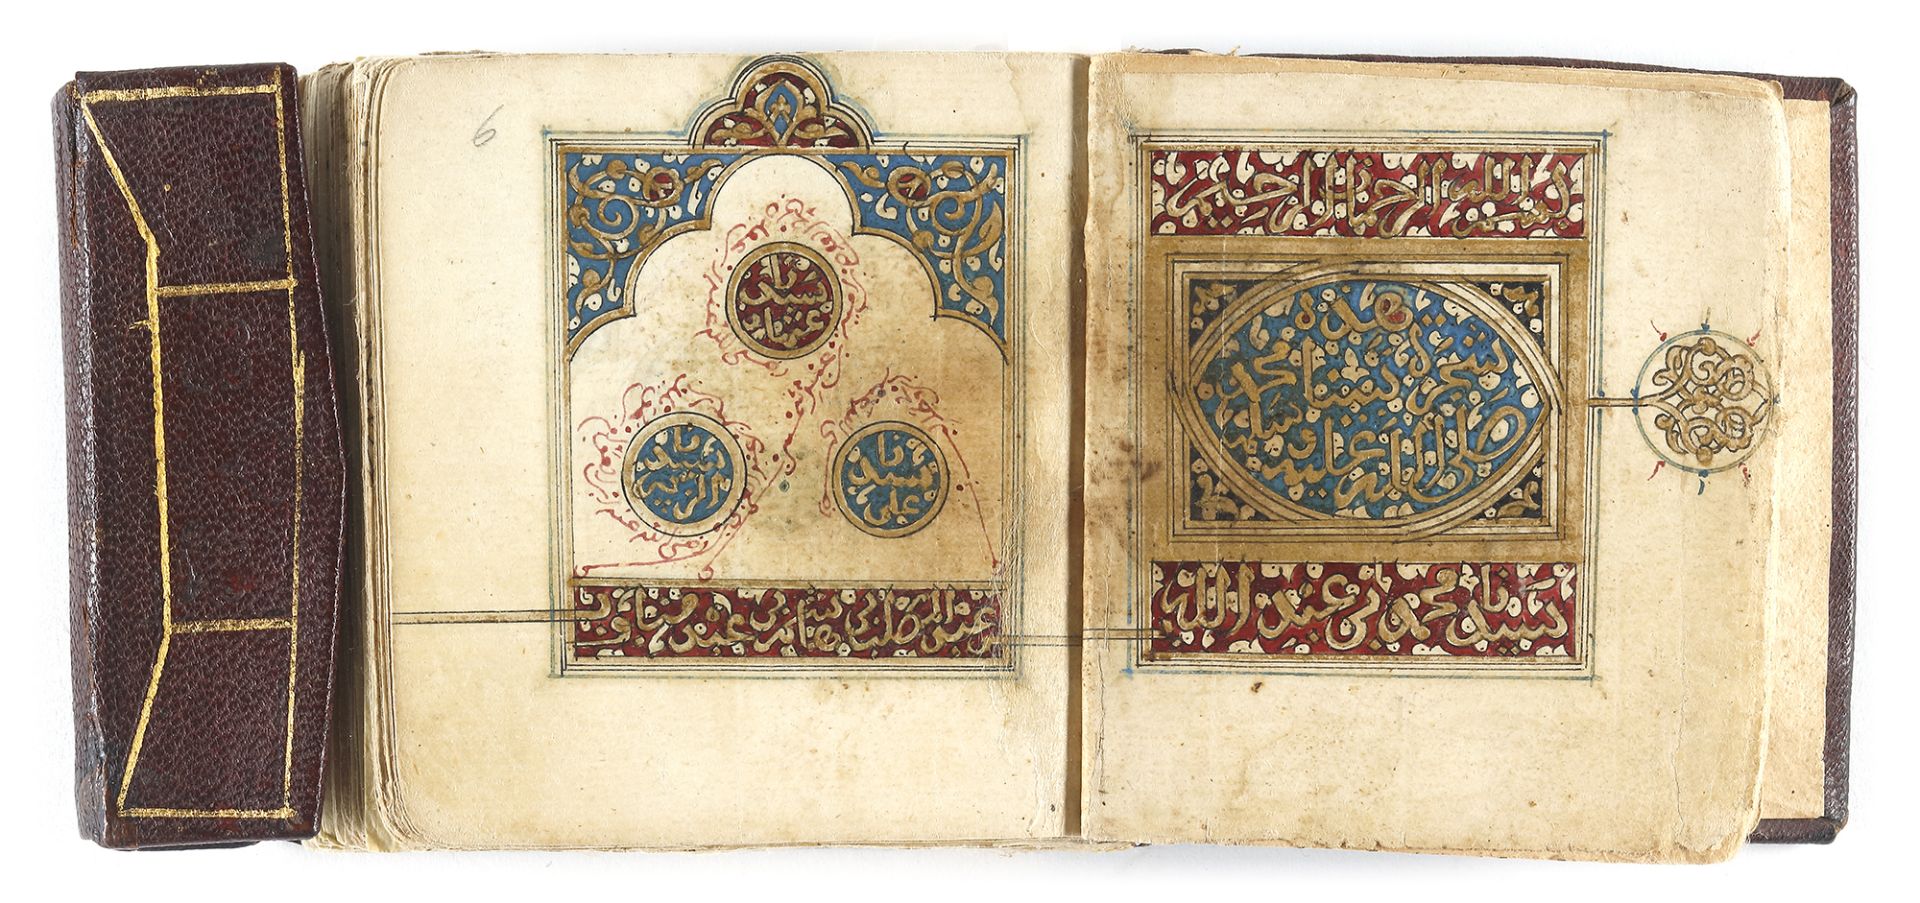 AN ILLUMINATED COLLECTION OF PRAYERS, INCLUDING DALA’IL AL-KHAYRAT, MOROCCO, DATED 1196 AH/1685 AD - Image 3 of 8